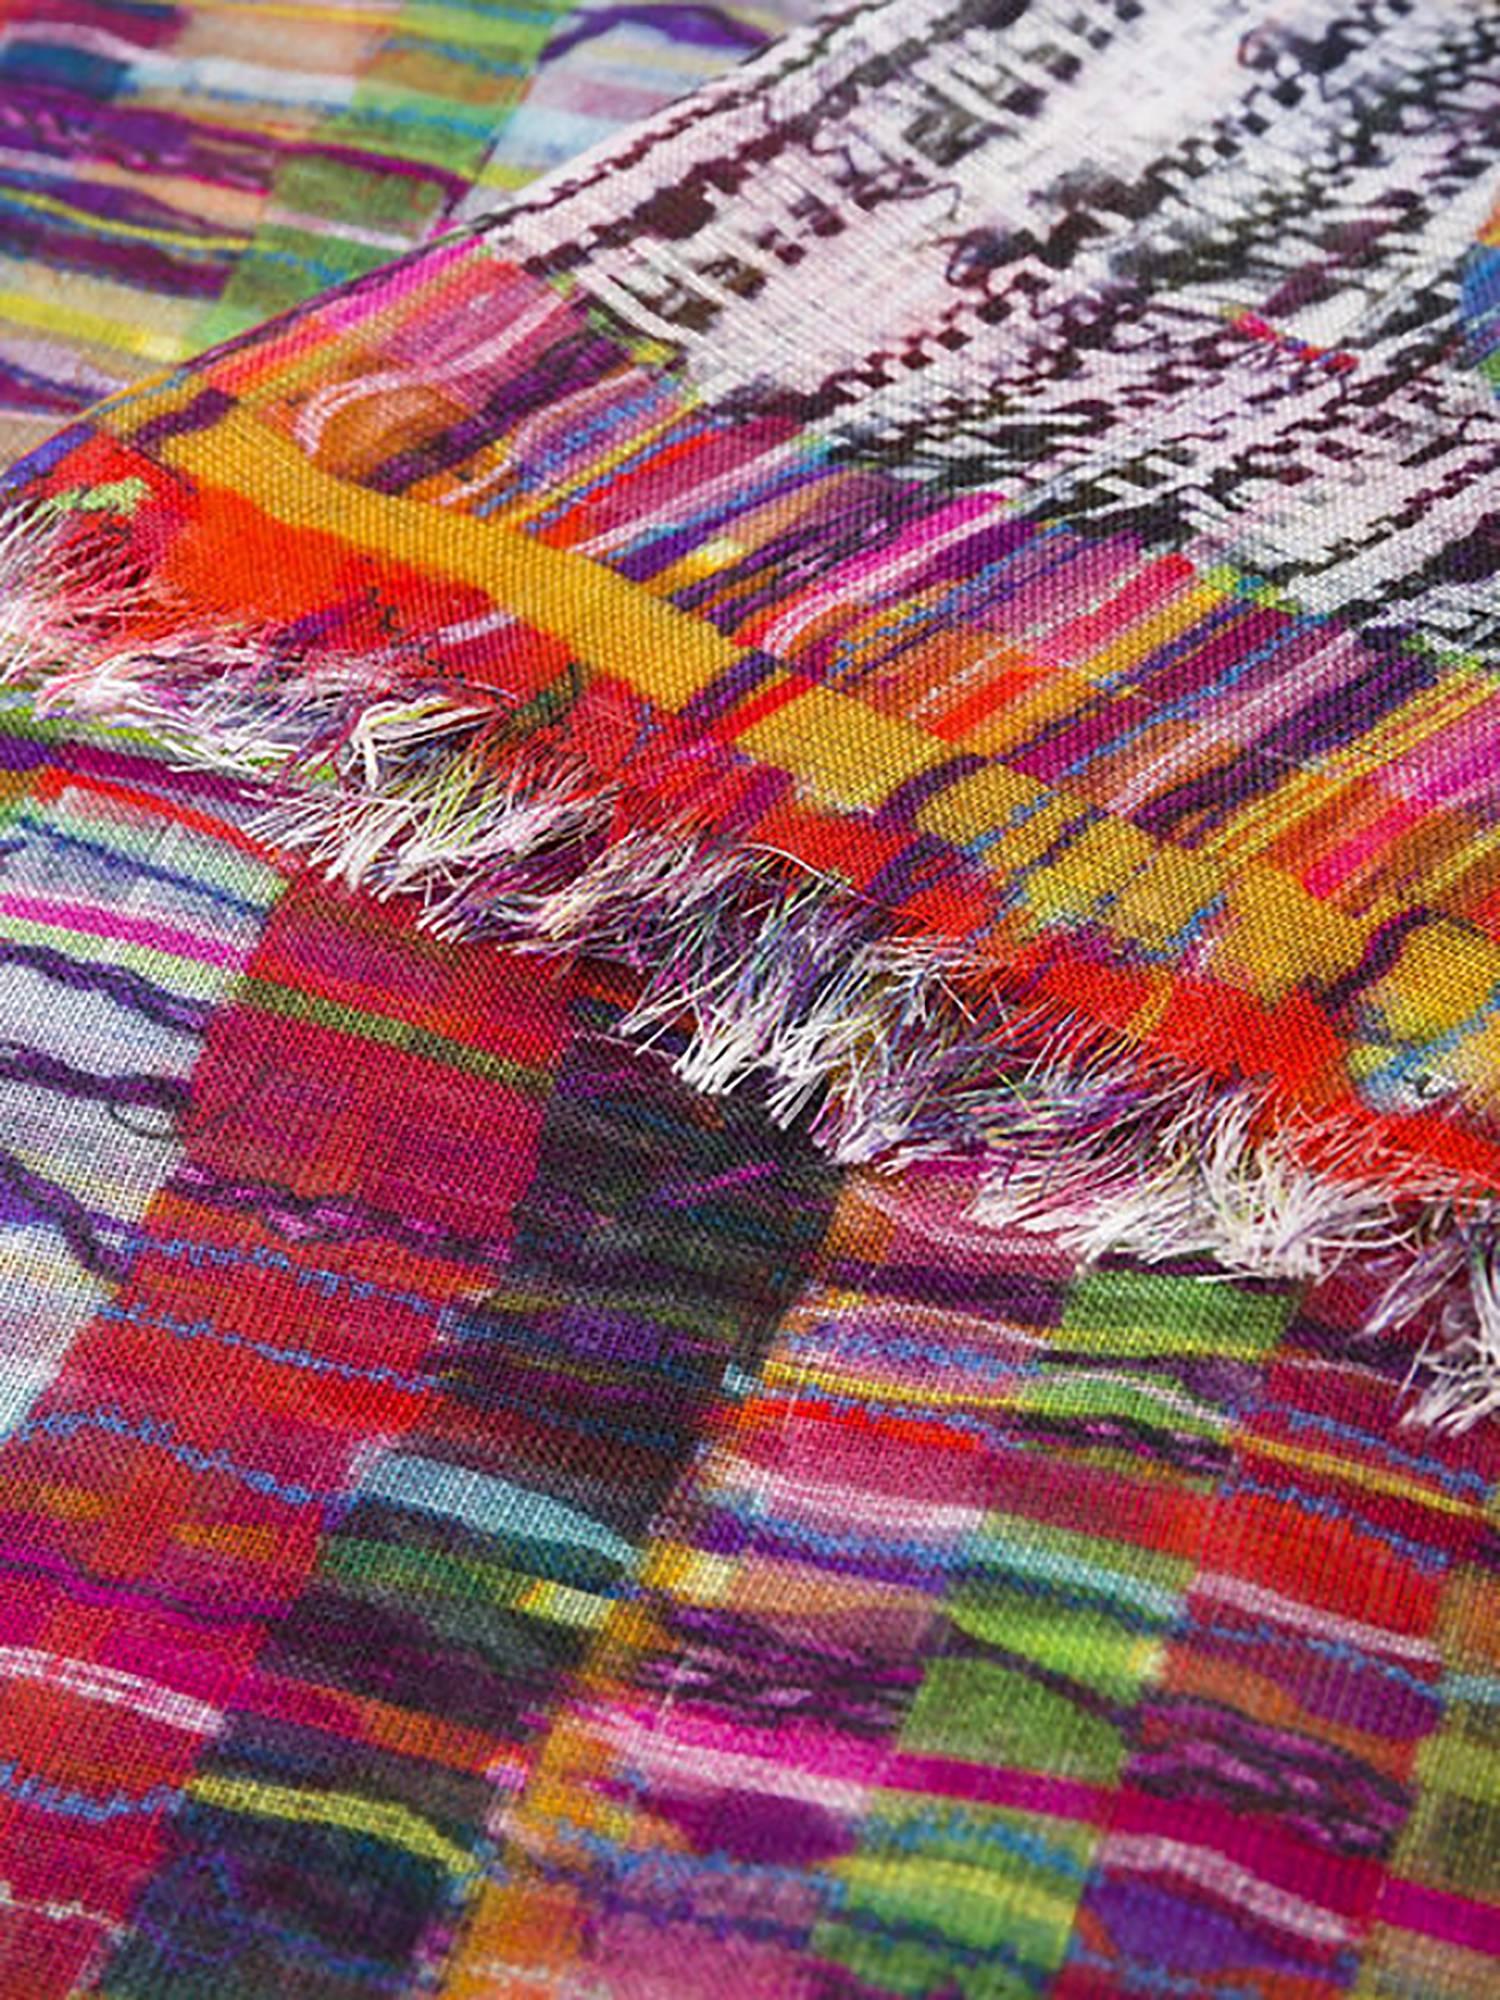 Multicoloured cashmere-silk blend striped scarf from Chanel Vintage featuring fringed edges. 

Dimensions: L180cm x H130cm

Please note that vintage items are not new and therefore might have minor imperfections.

Made in Italy
